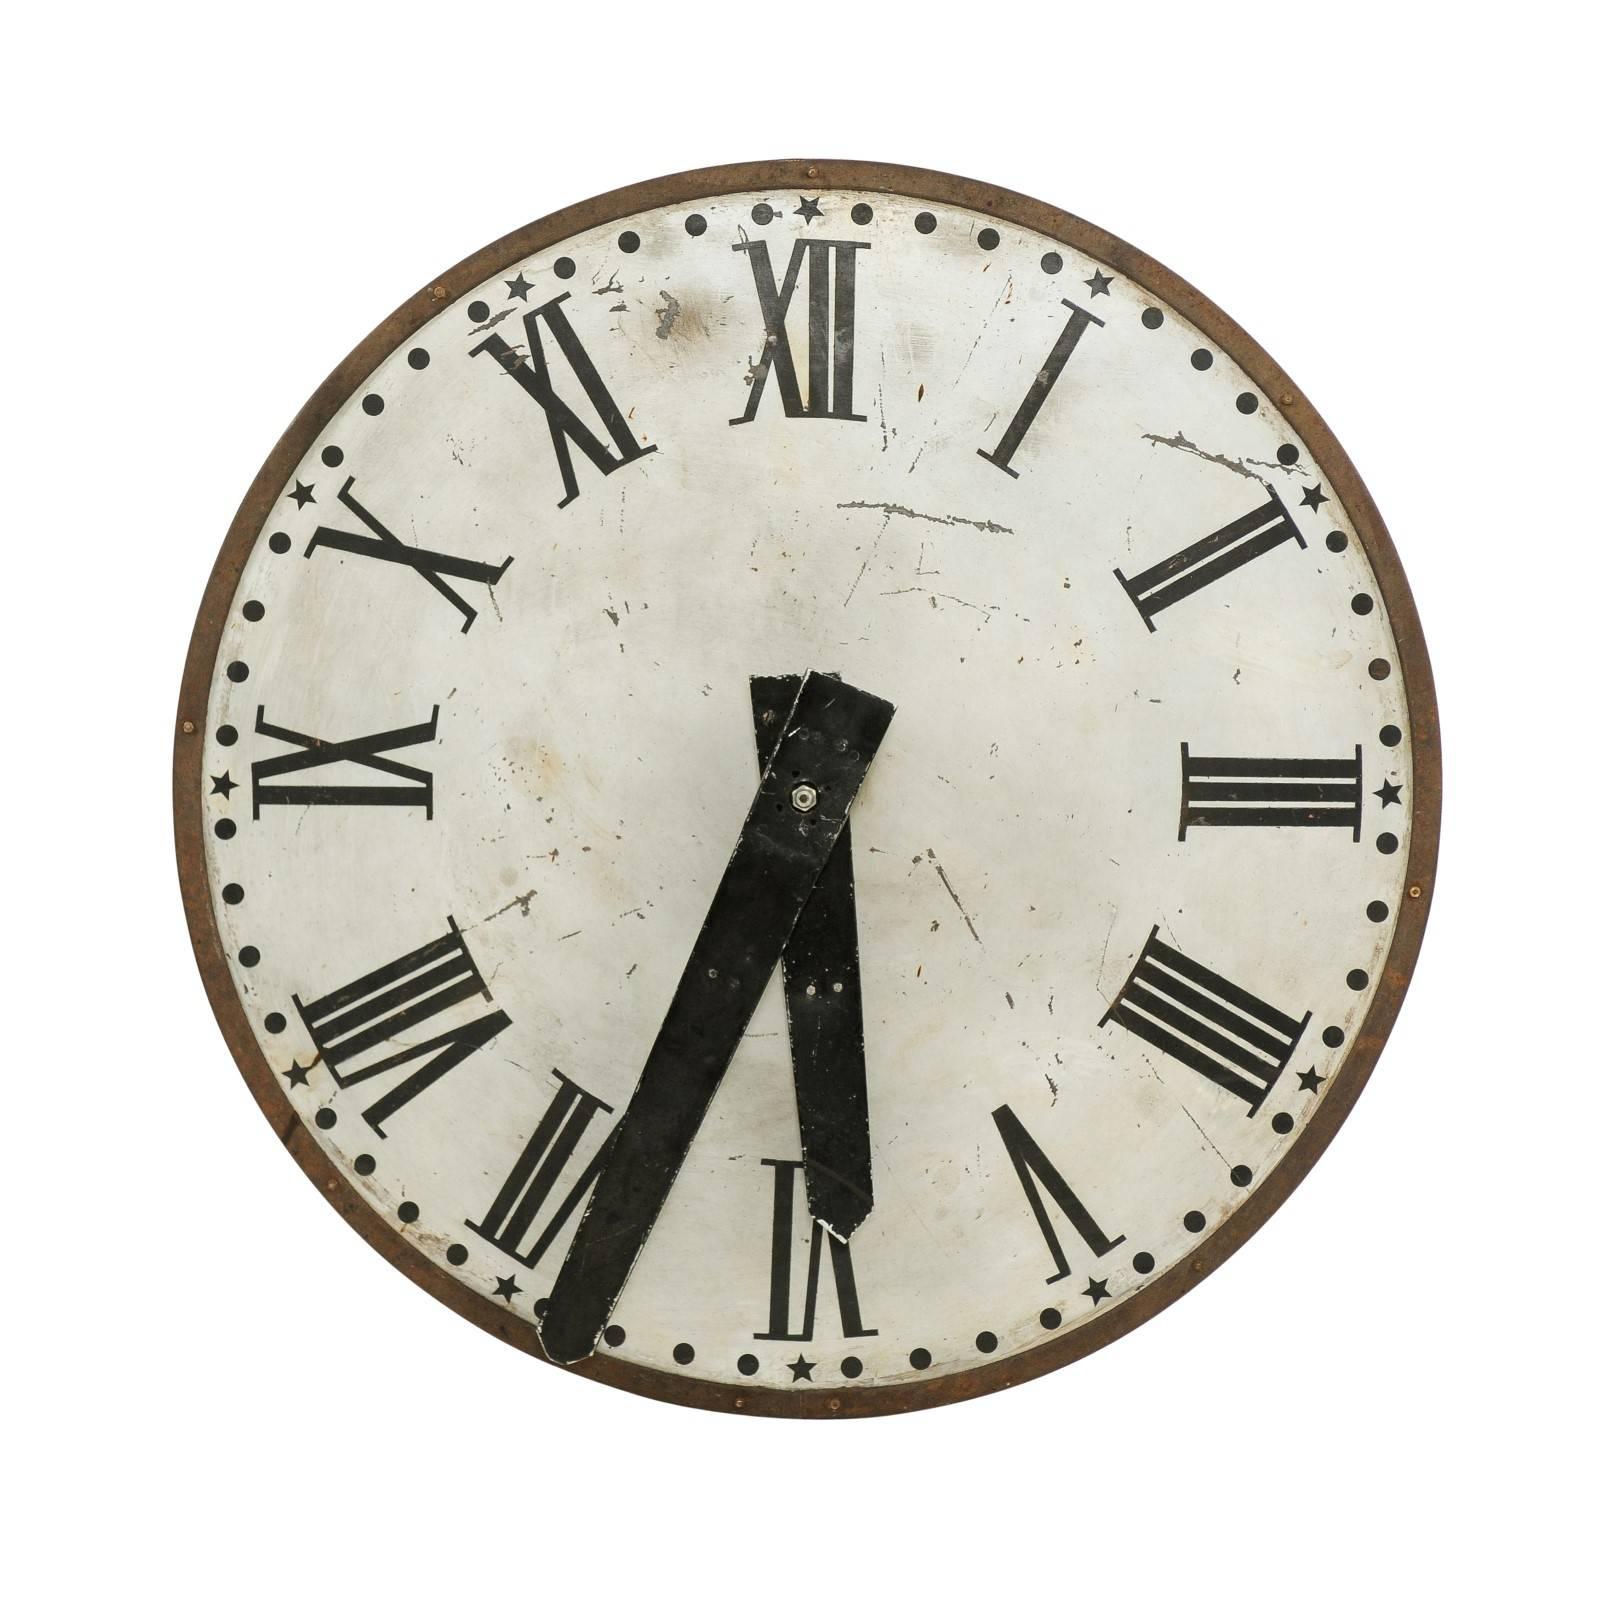 1890s Large Church Decorative Clock Face from the Haute-Loire Region of France